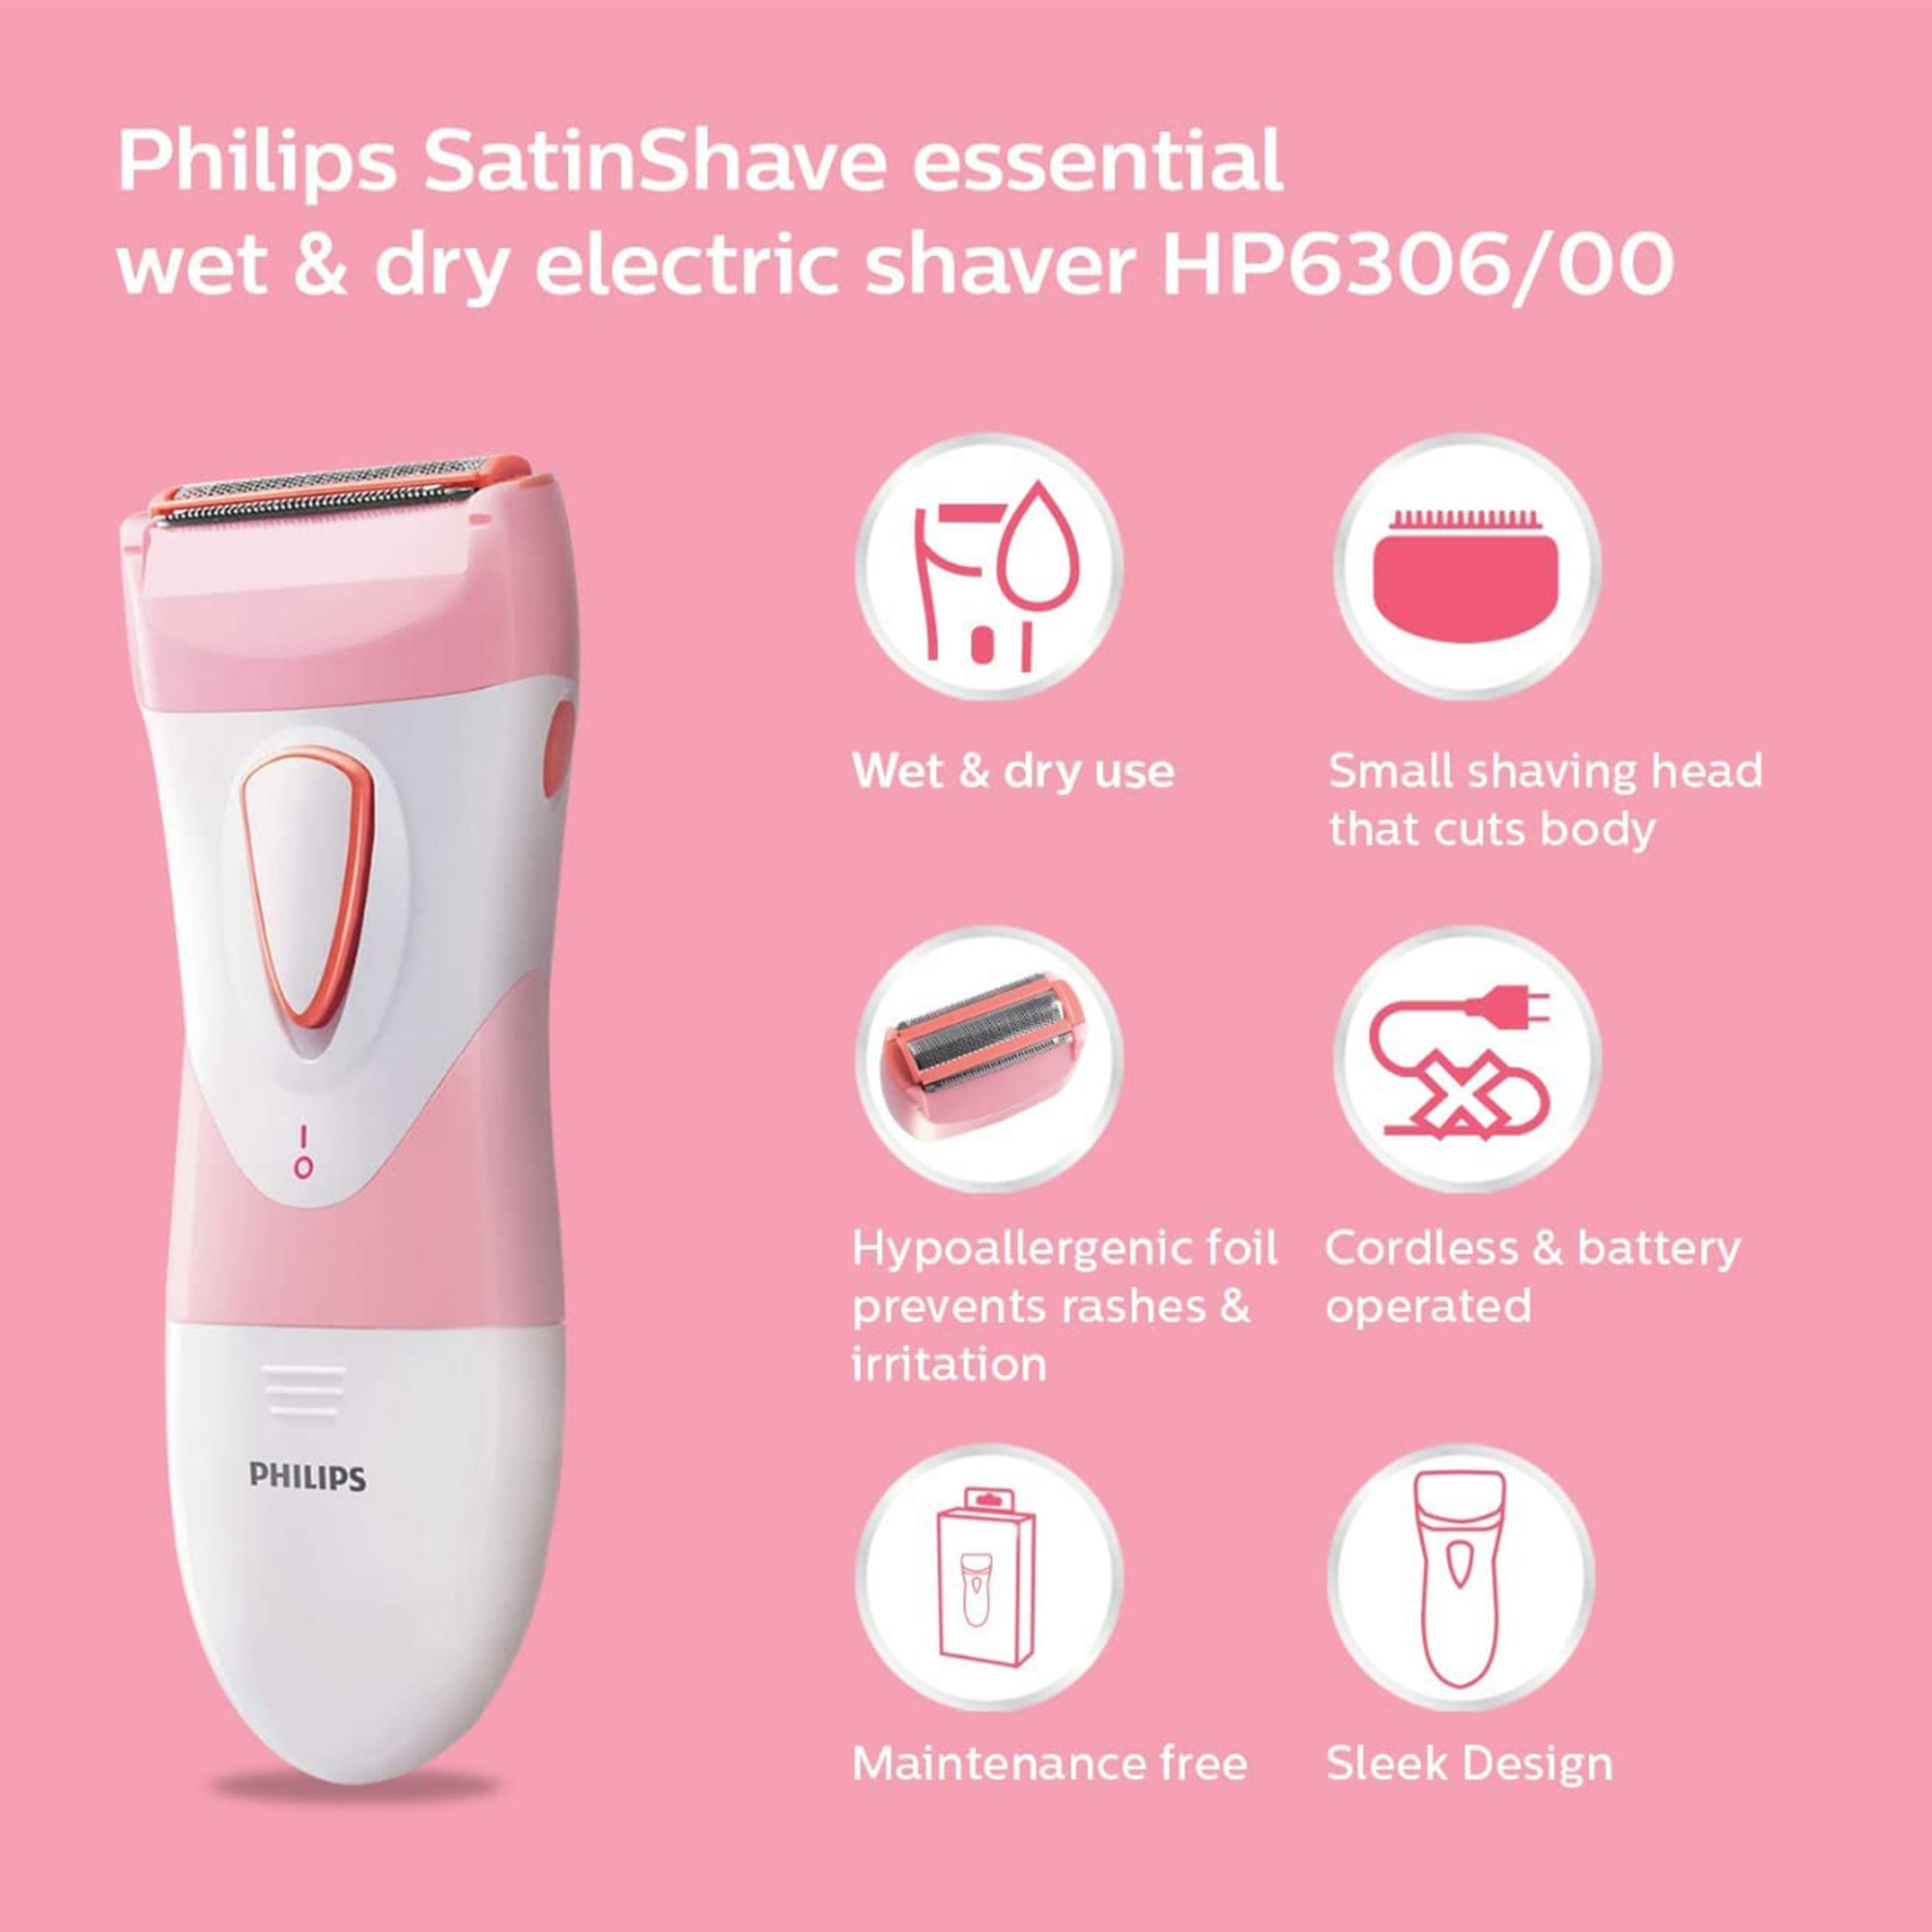 Philips SatinShave Cordless Electric Razor for Women Wet & Dry Use Lady Shaver - image 5 of 6